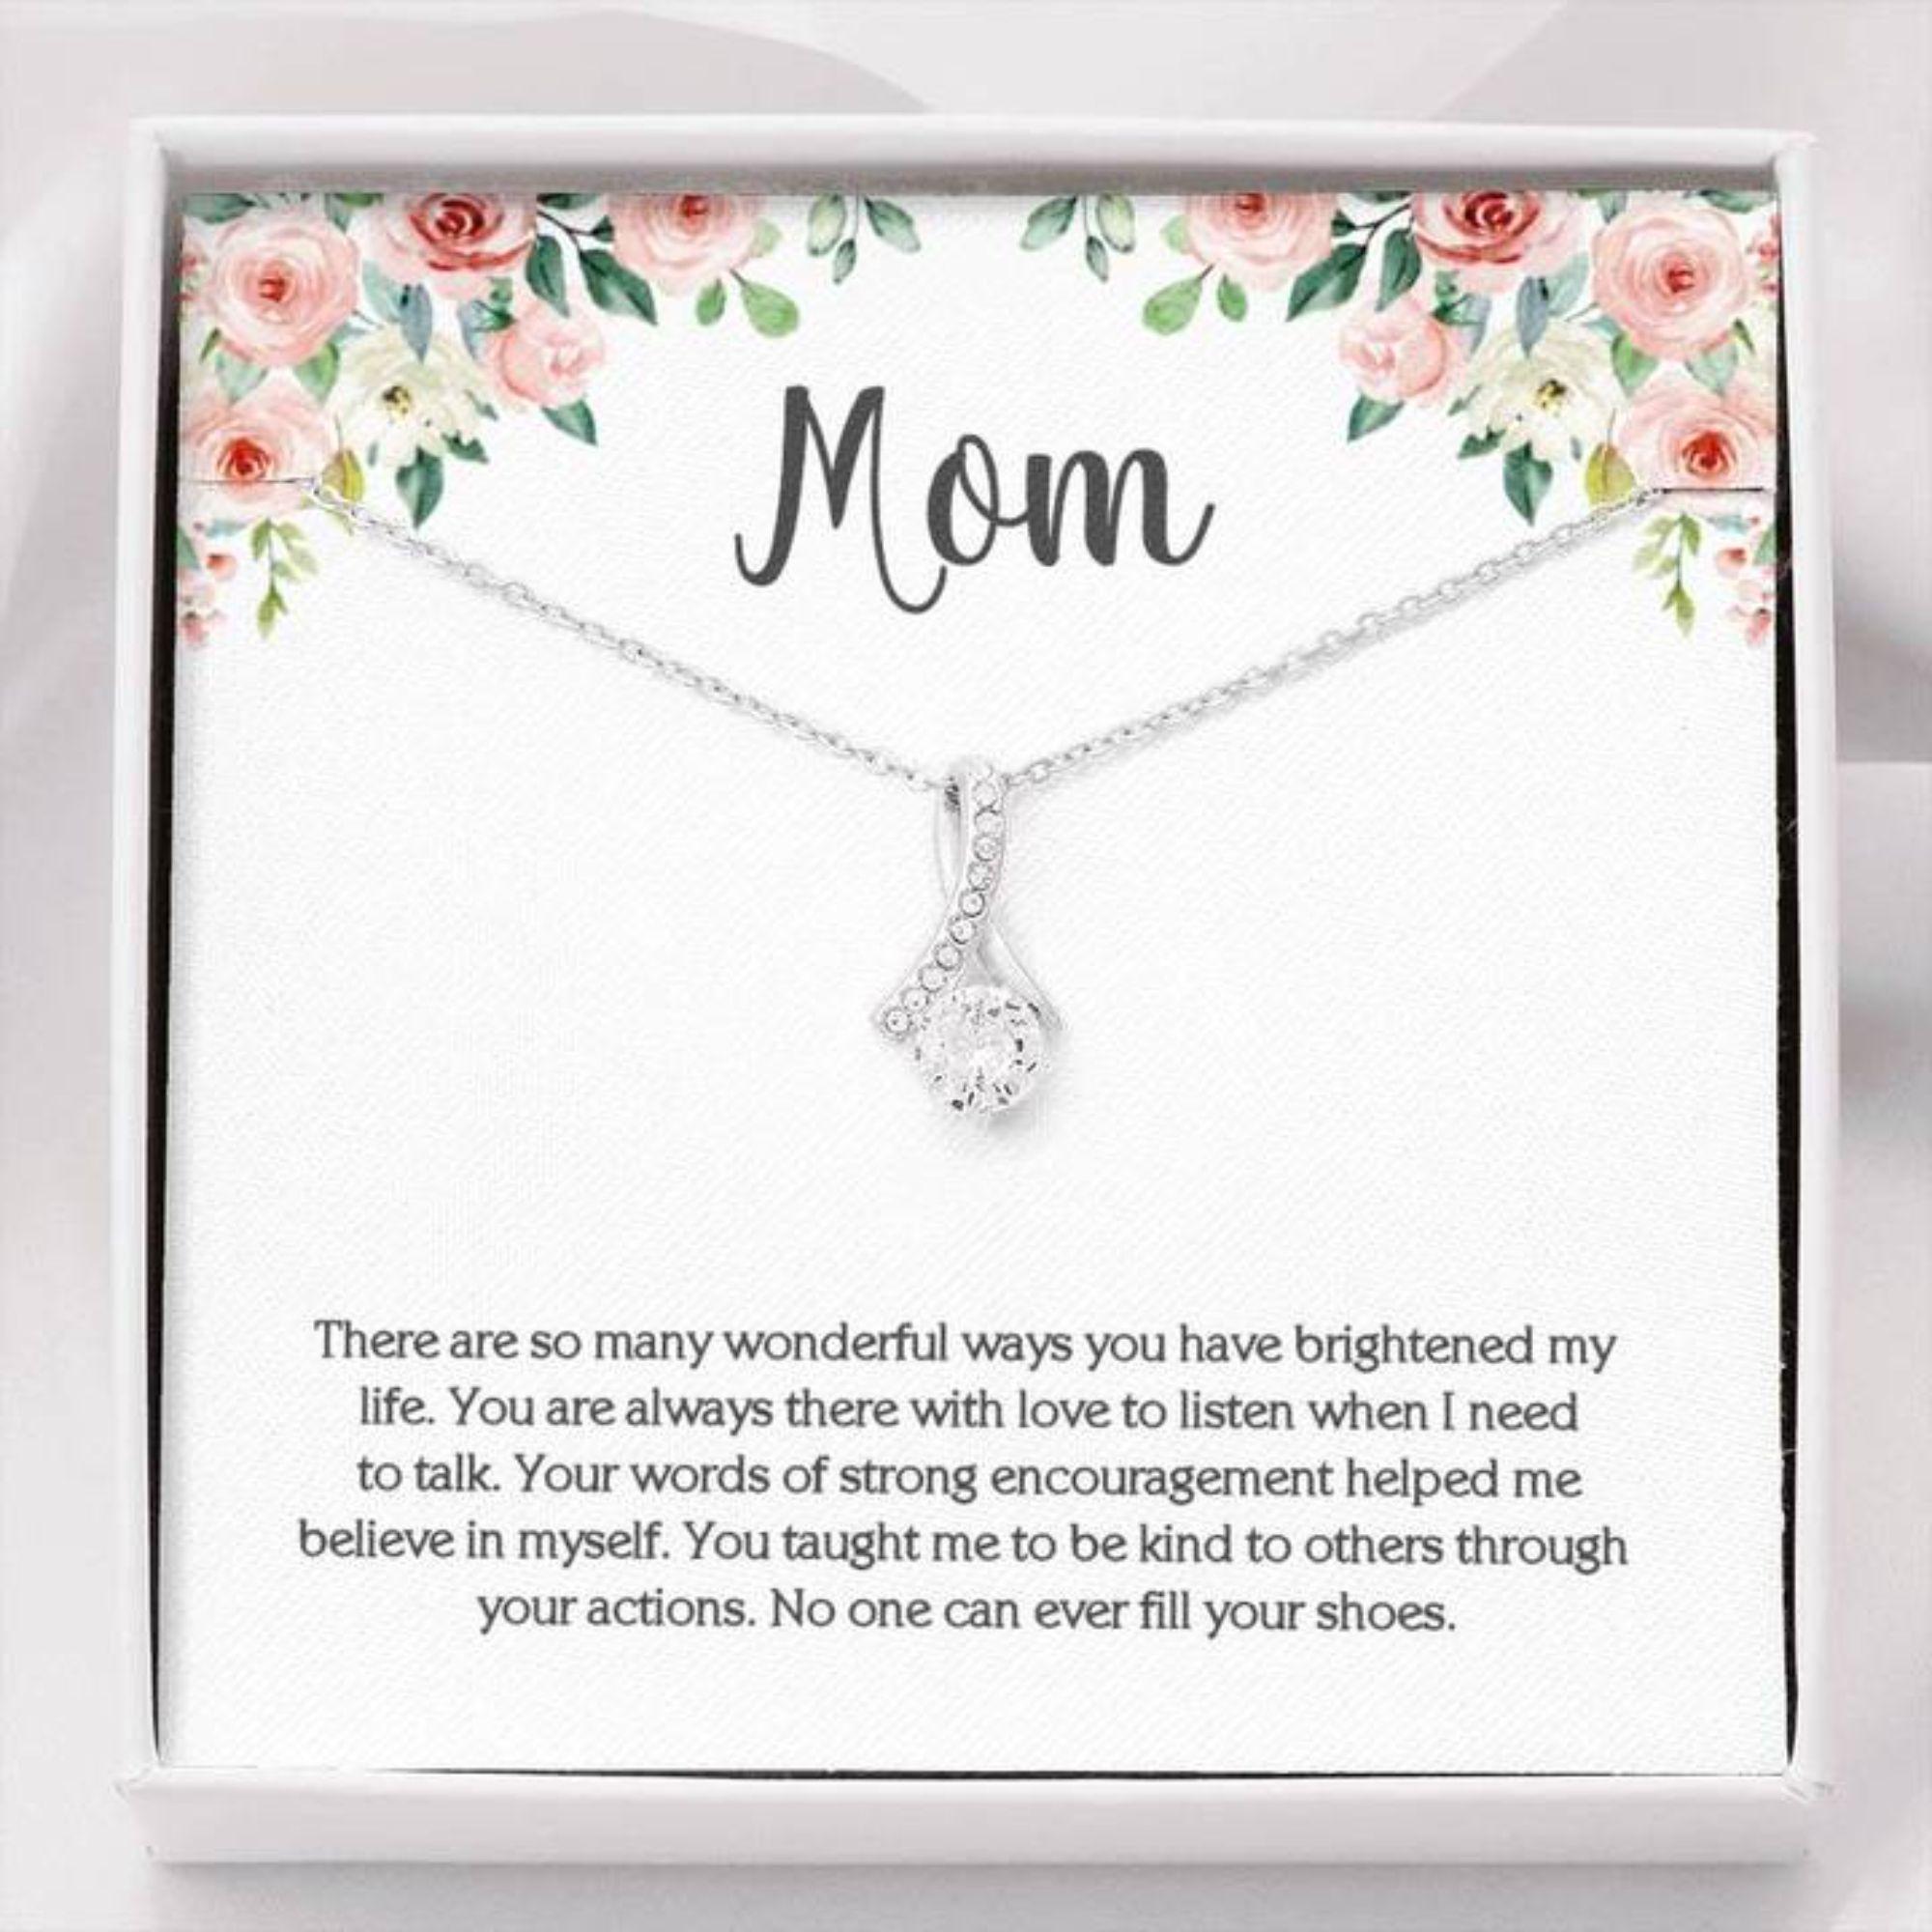 Mom Necklace, Cubic Zirconia Pendant Necklace For Mom On White